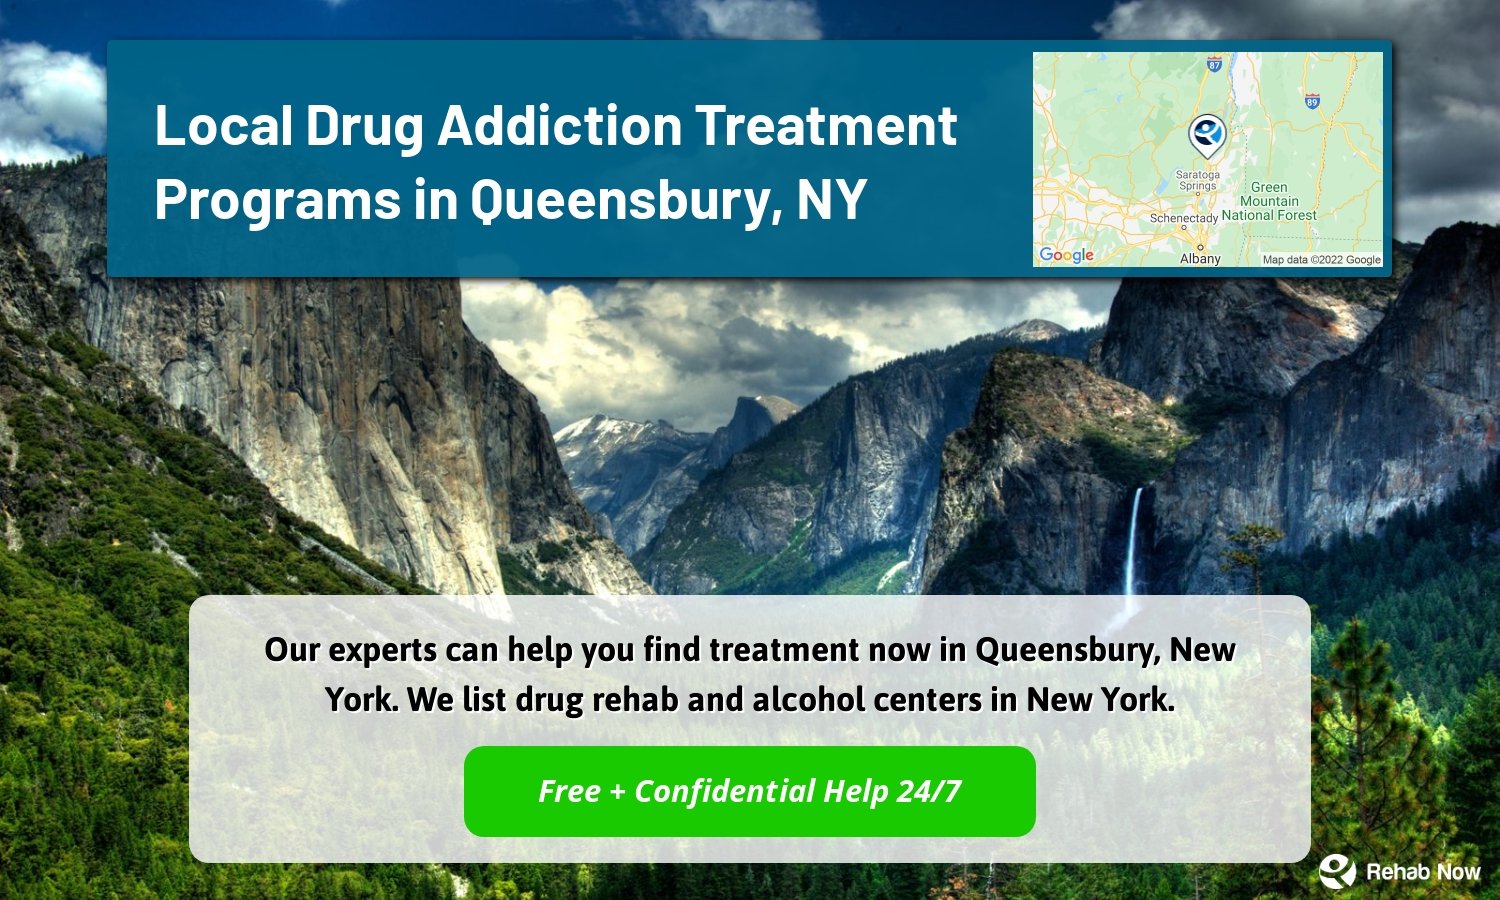 Our experts can help you find treatment now in Queensbury, New York. We list drug rehab and alcohol centers in New York.